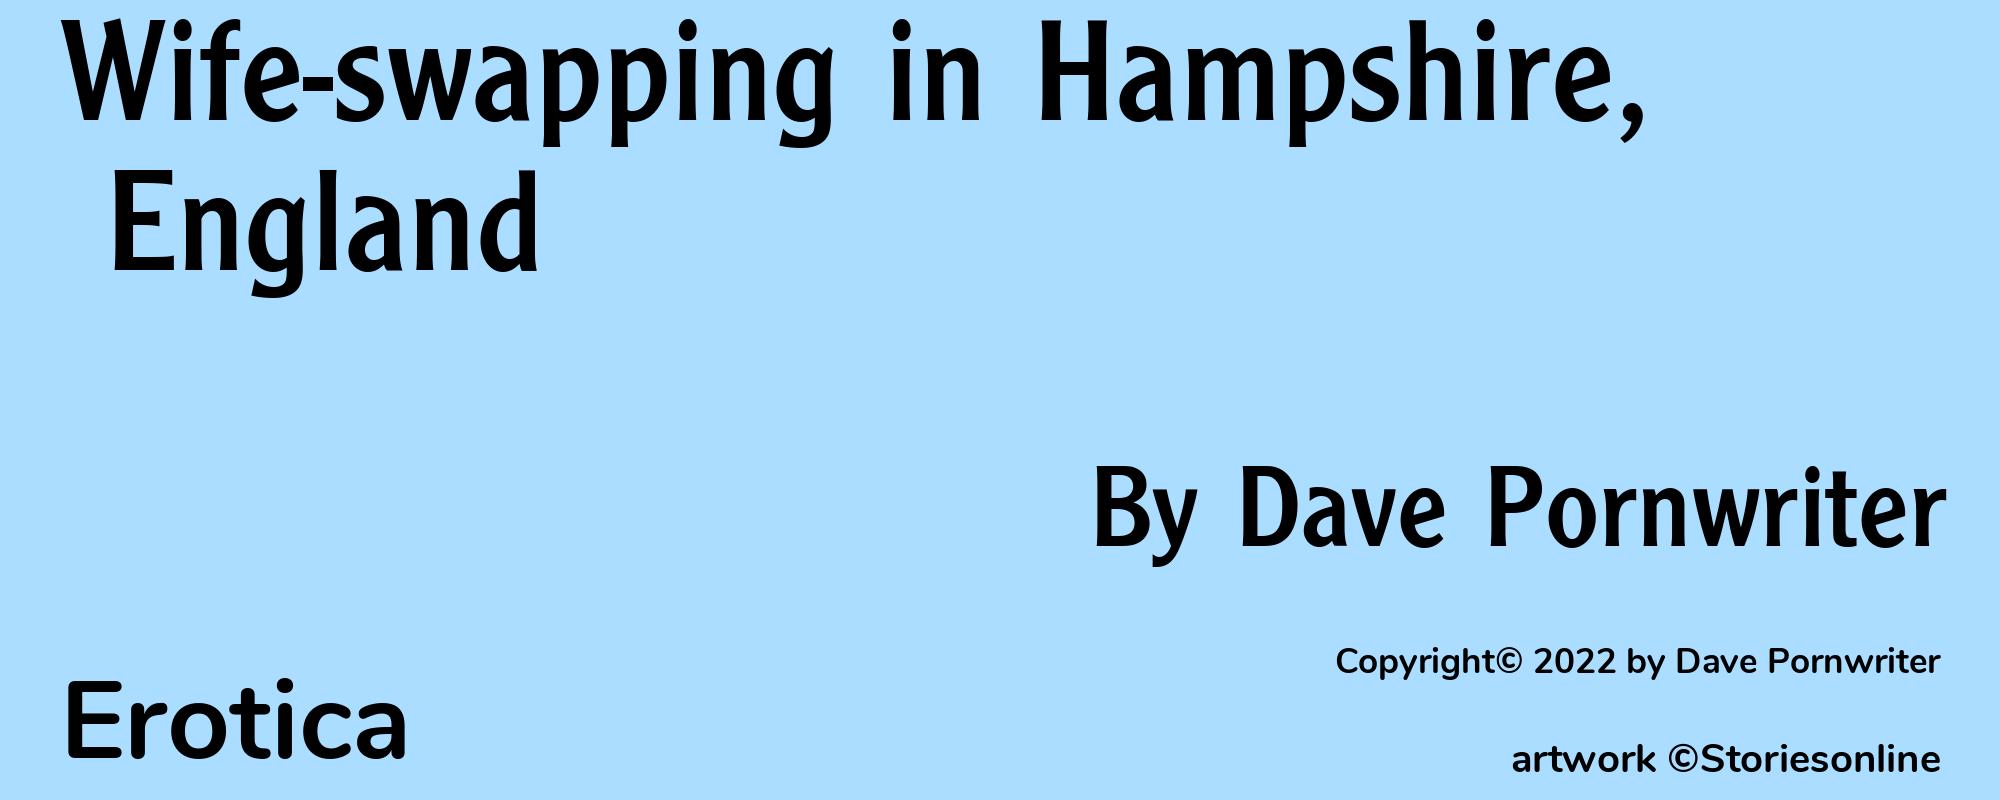 Wife-swapping in Hampshire, England - Cover